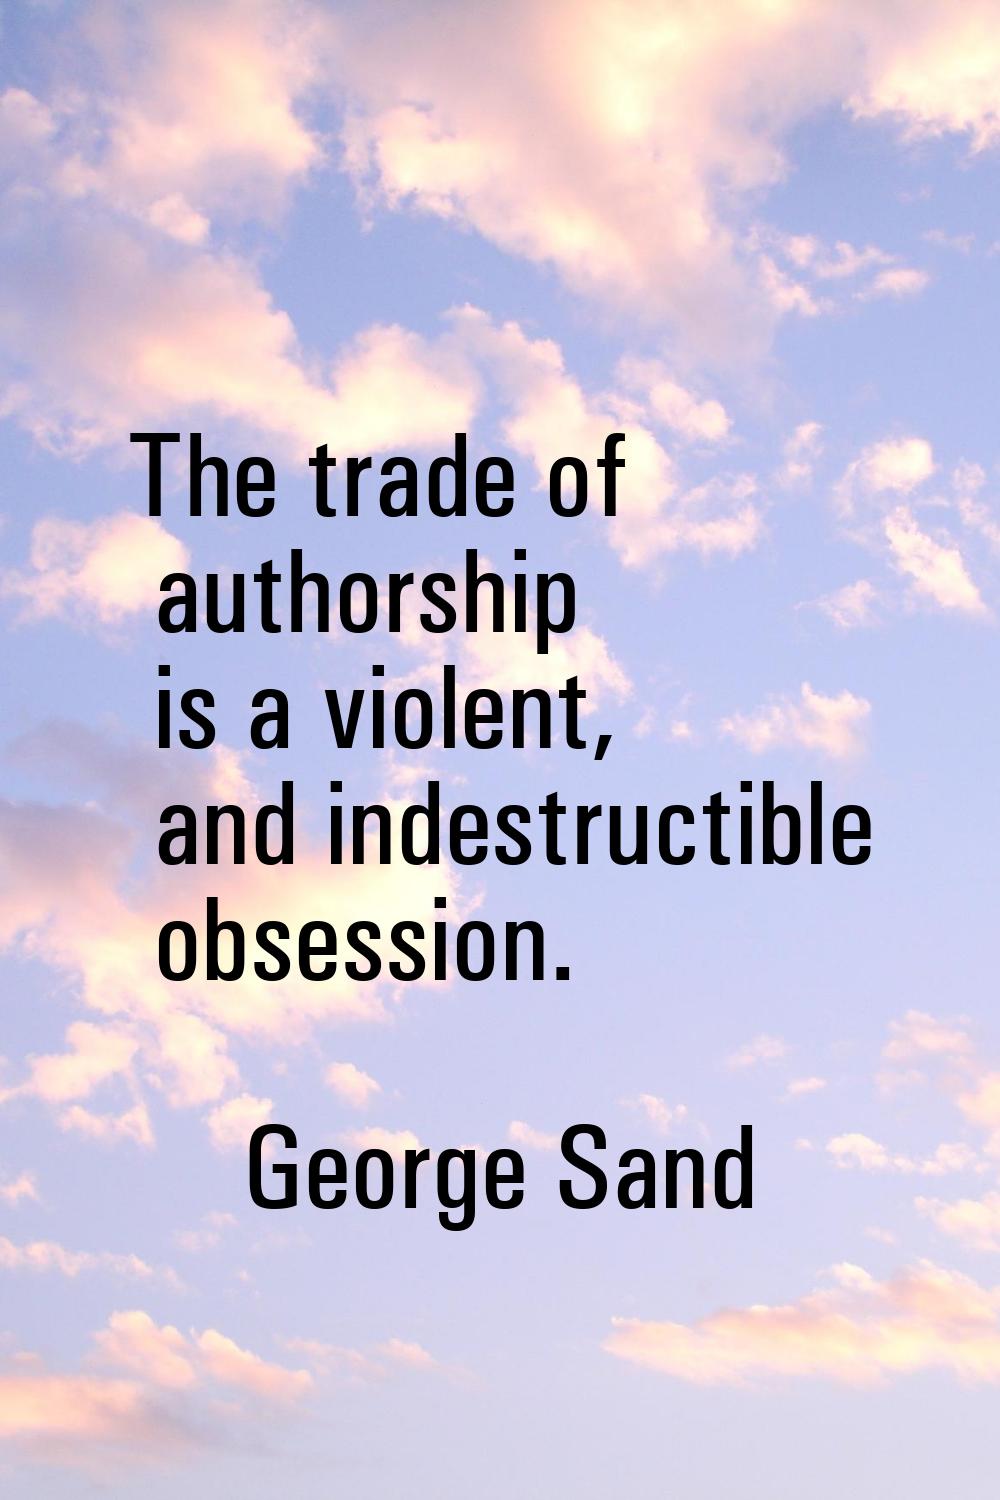 The trade of authorship is a violent, and indestructible obsession.